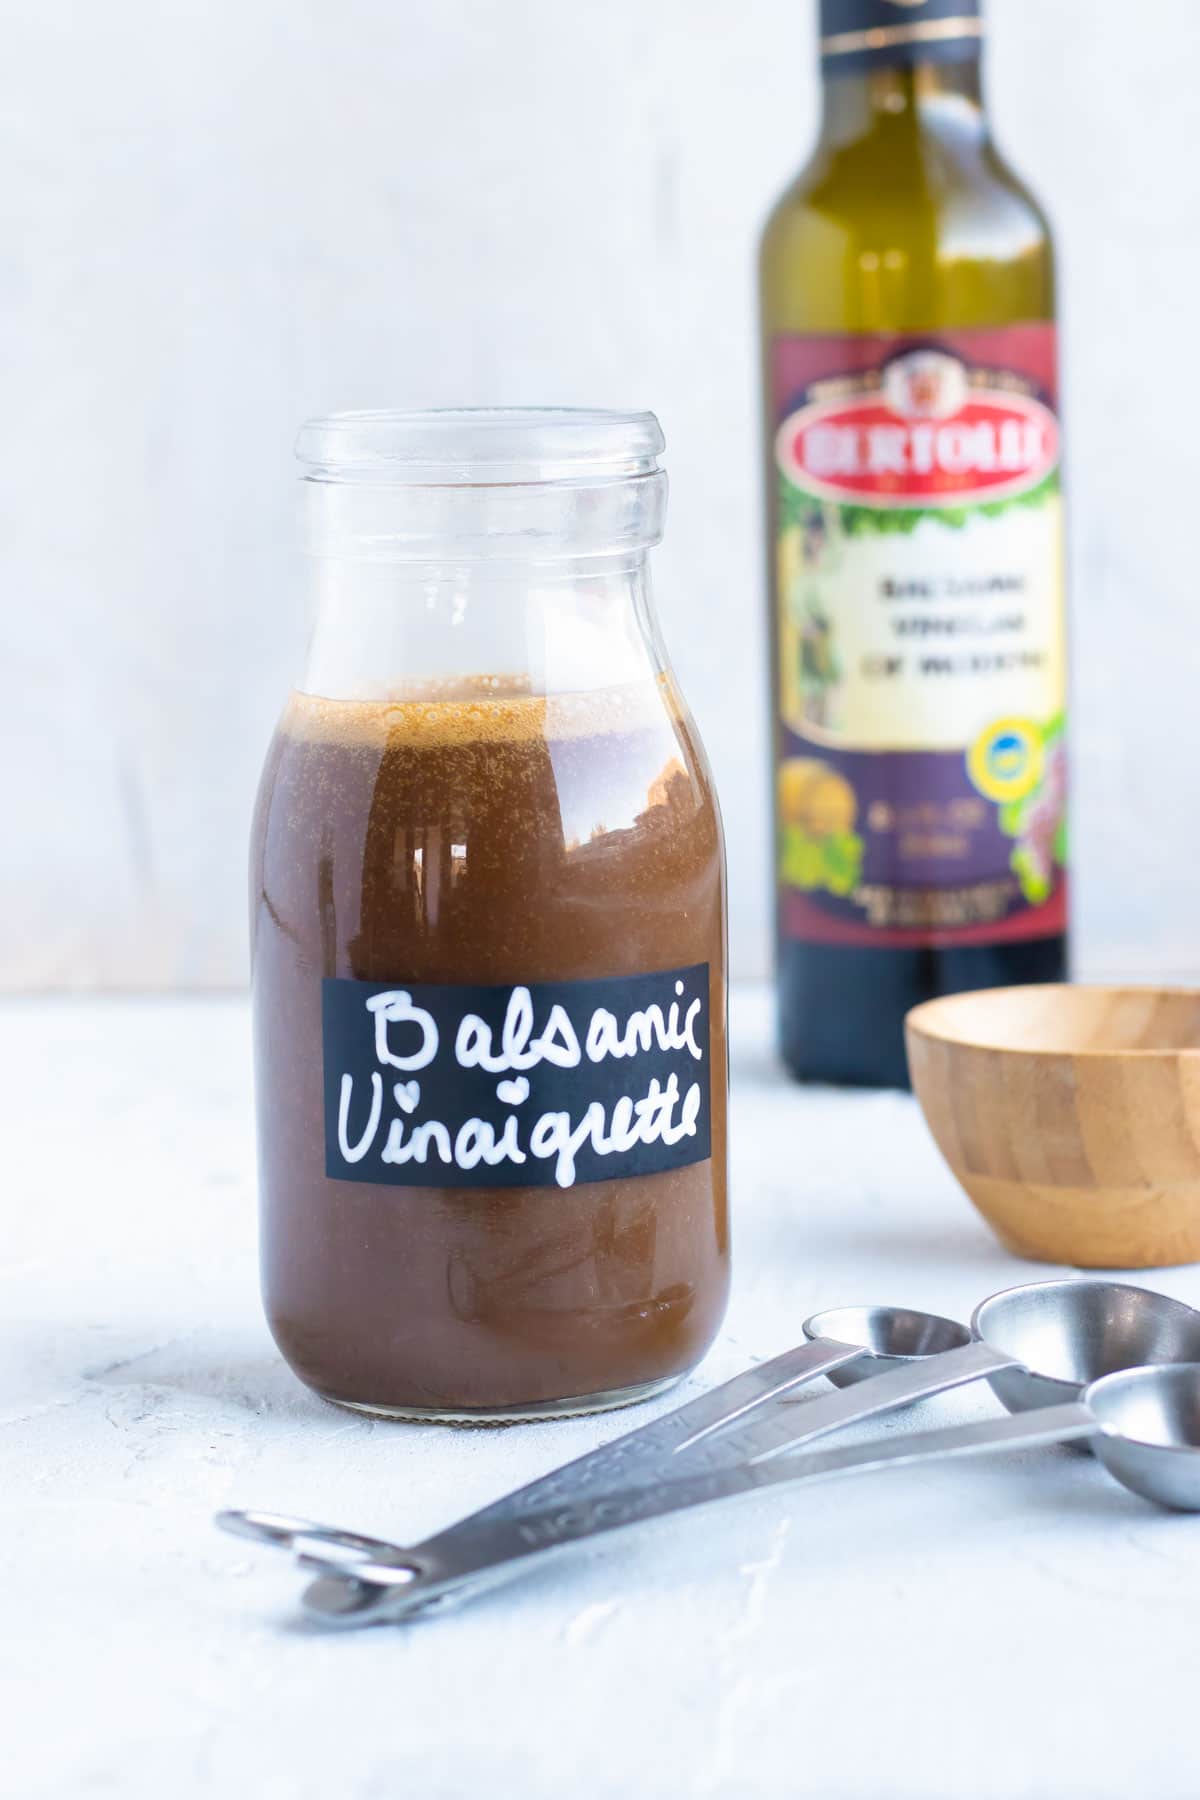 Balsamic vinaigrette salad dressing in a clear glass jar with balsamic vinegar in the background.